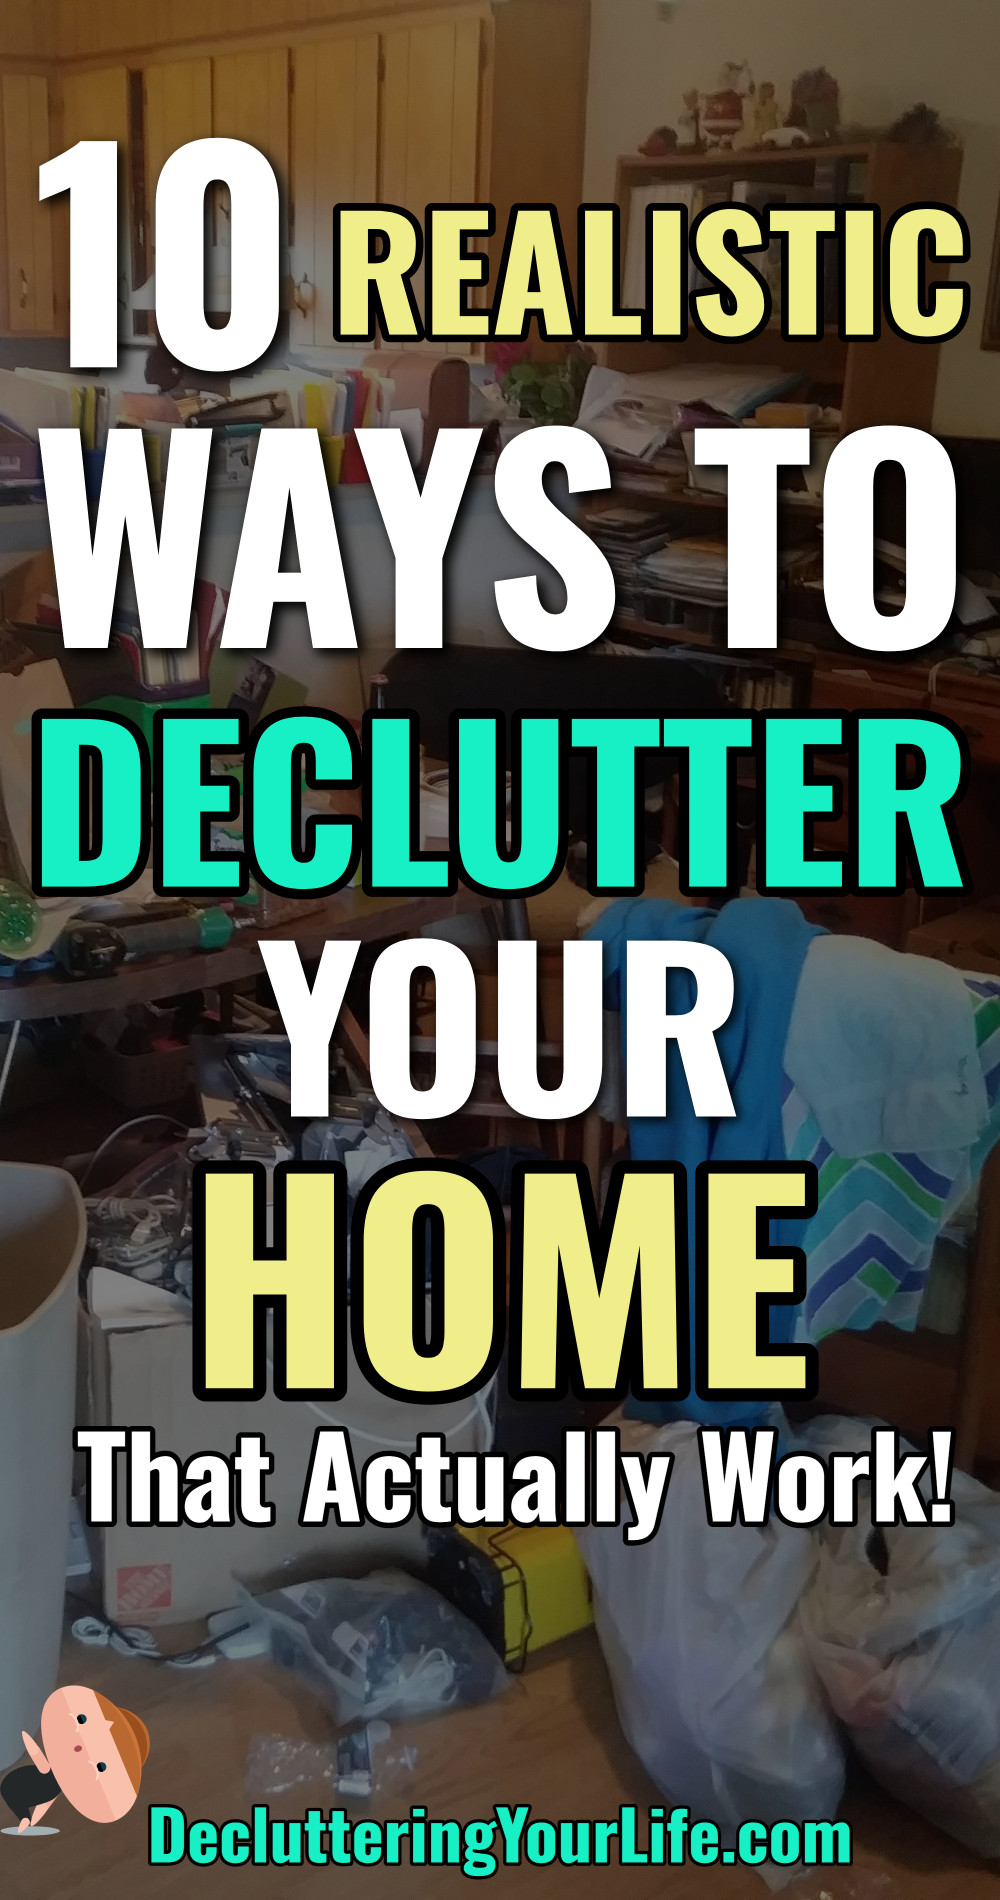 10 Realistic Ways To Declutter Your Home That Work